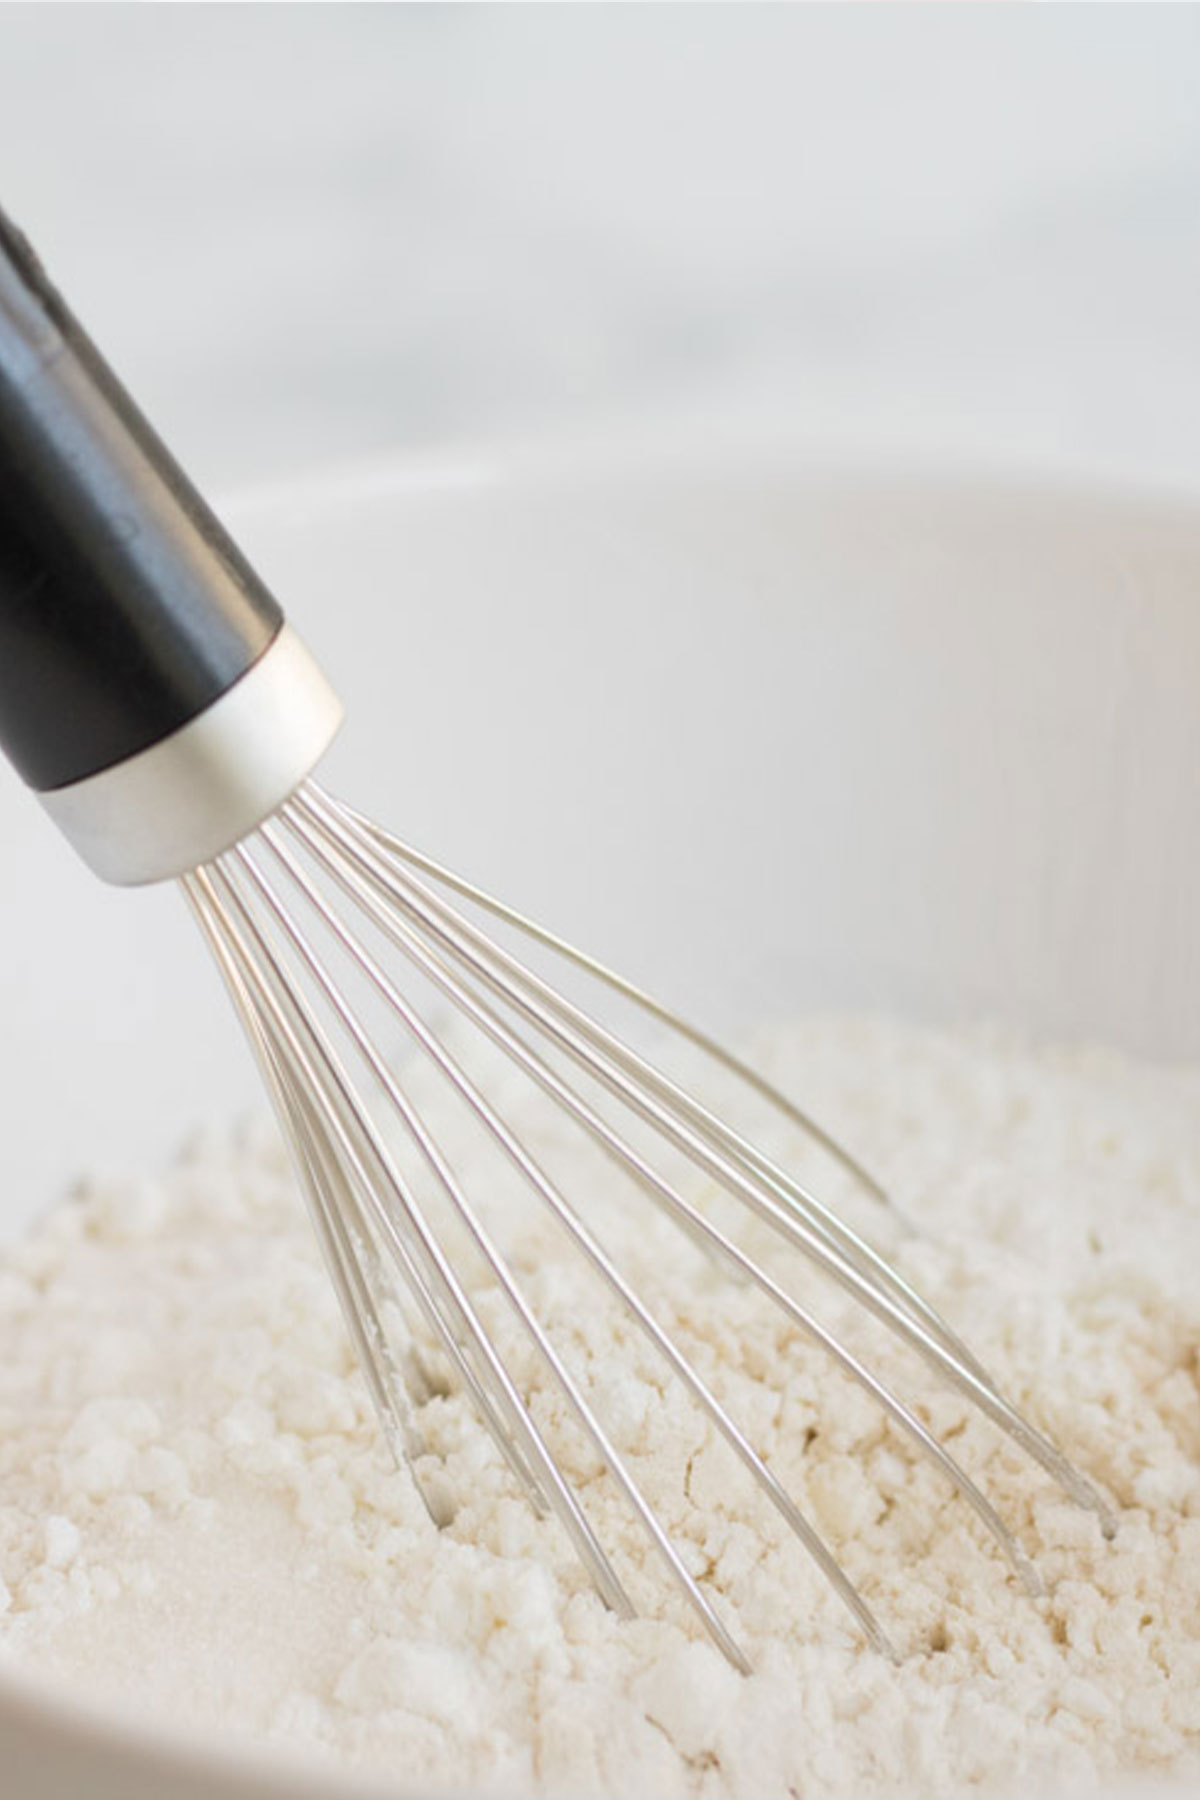 Whisking the dry ingredients in a bowl